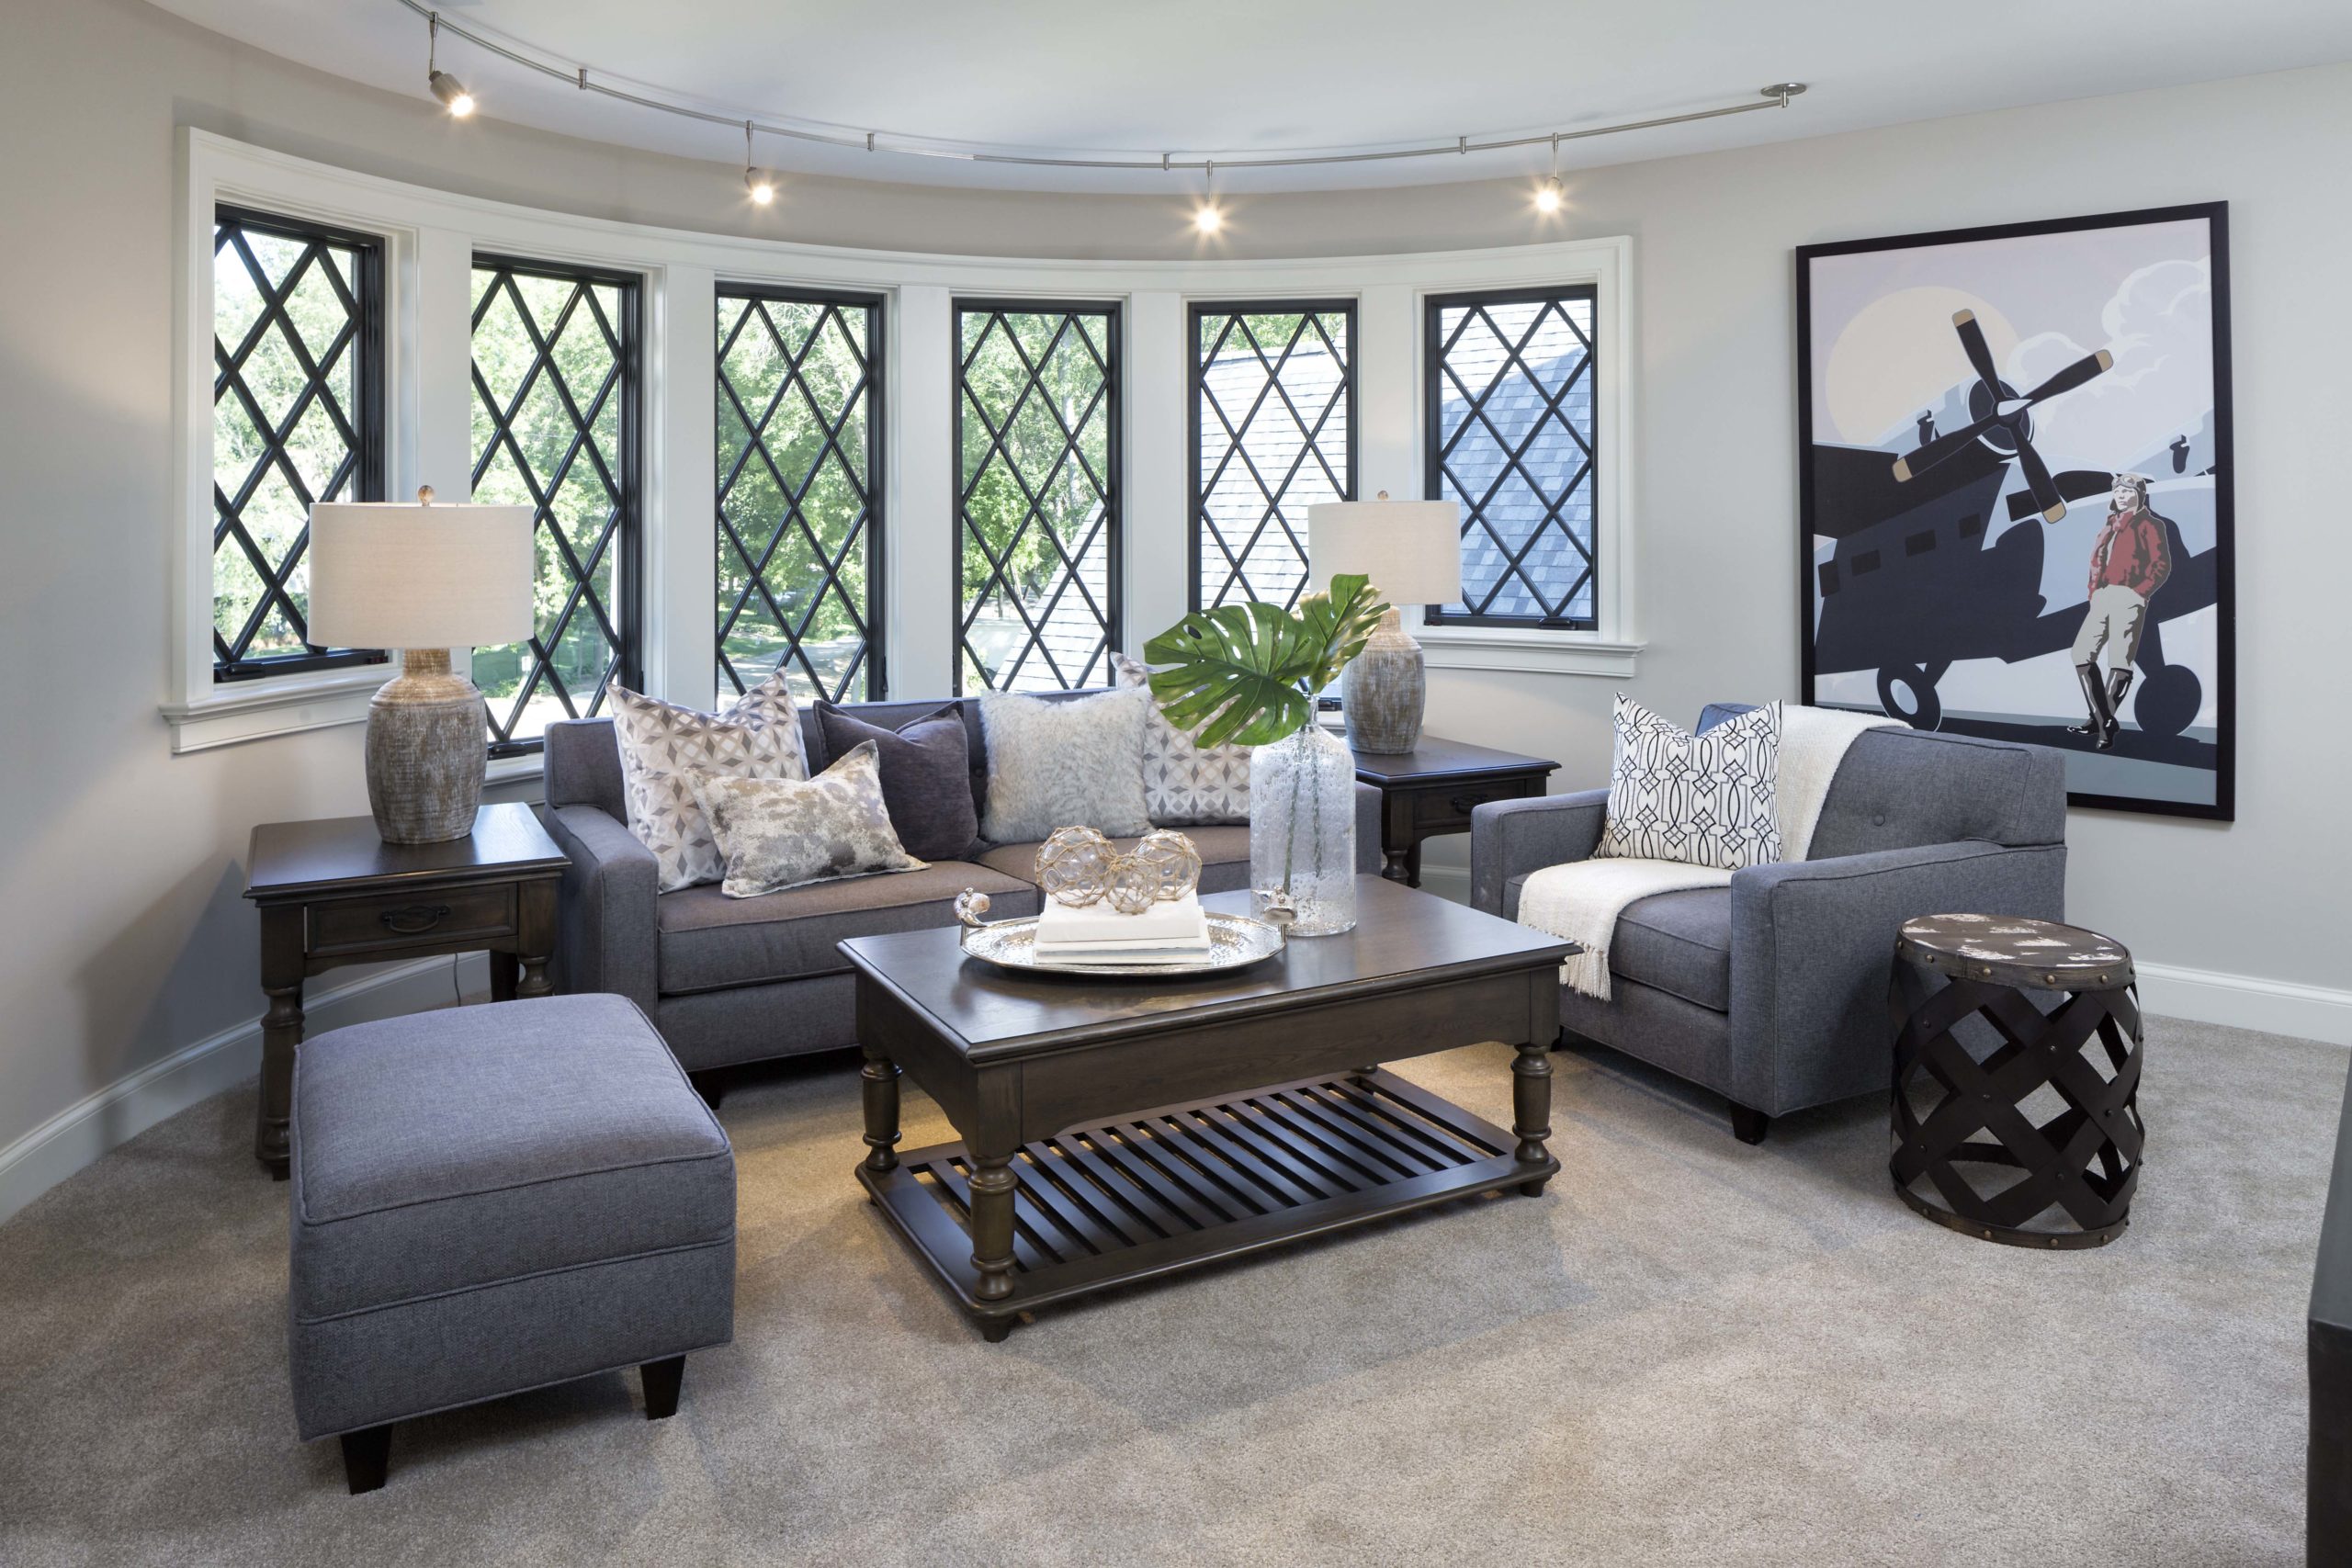 living room with diamond grilled window panes and a large grey sectional couch in the room